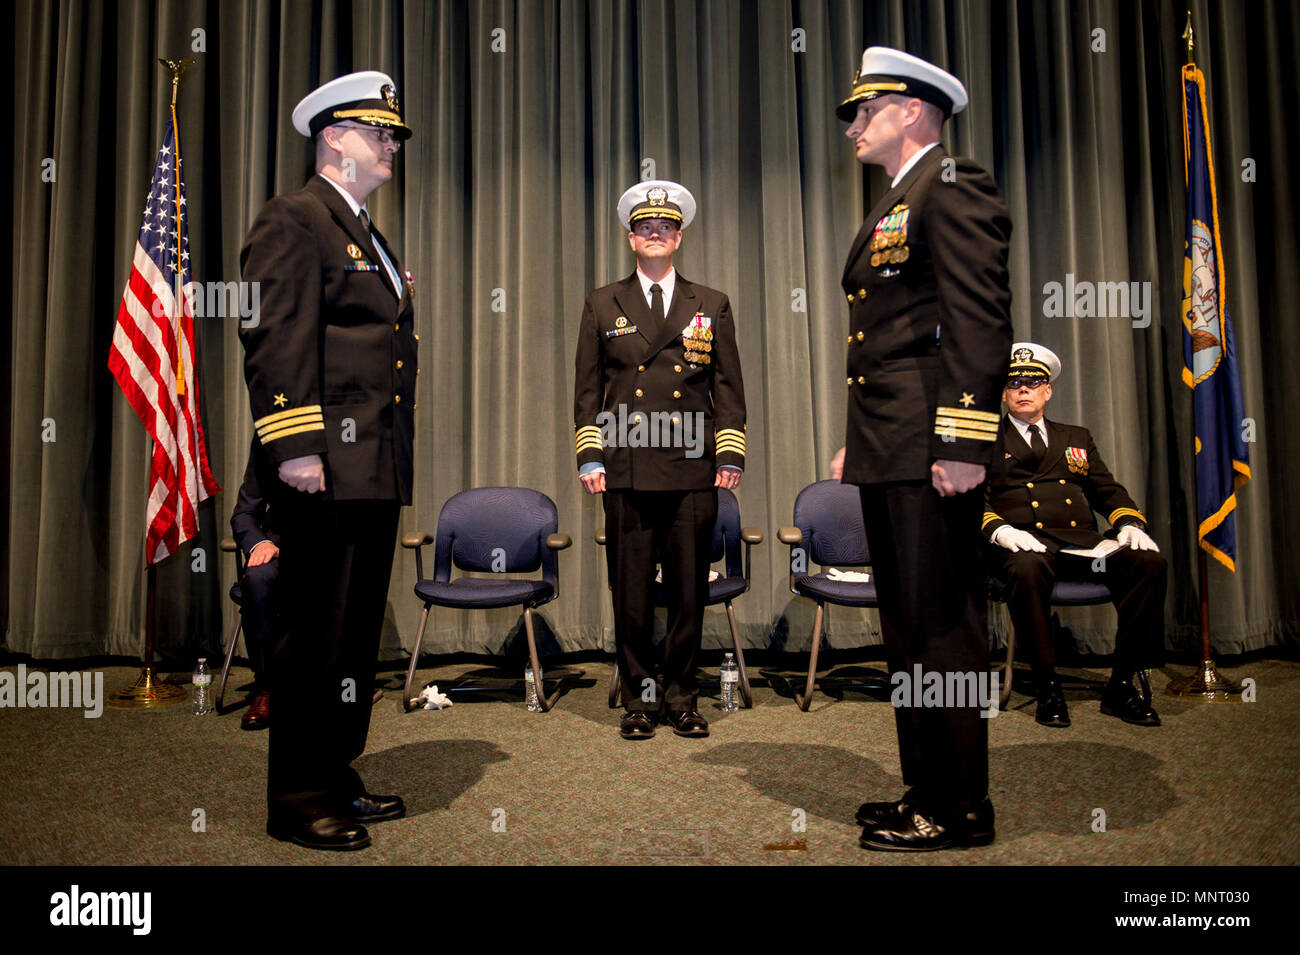 Cmdr. Andrew Clark, left, requests to be relieved of command by Capt. Nicholas R. Tilbrook, Submarine Squadron 17, center, during a change of command ceremony for the Gold crew of the Ohio-class ballistic missile submarine USS Pennsylvania (SSBN 735). Clark turned over command to Cmdr. Roger C. Ferguson, during the ceremony held at the Keyport Undersea Museum, March 15, 2018. Stock Photo